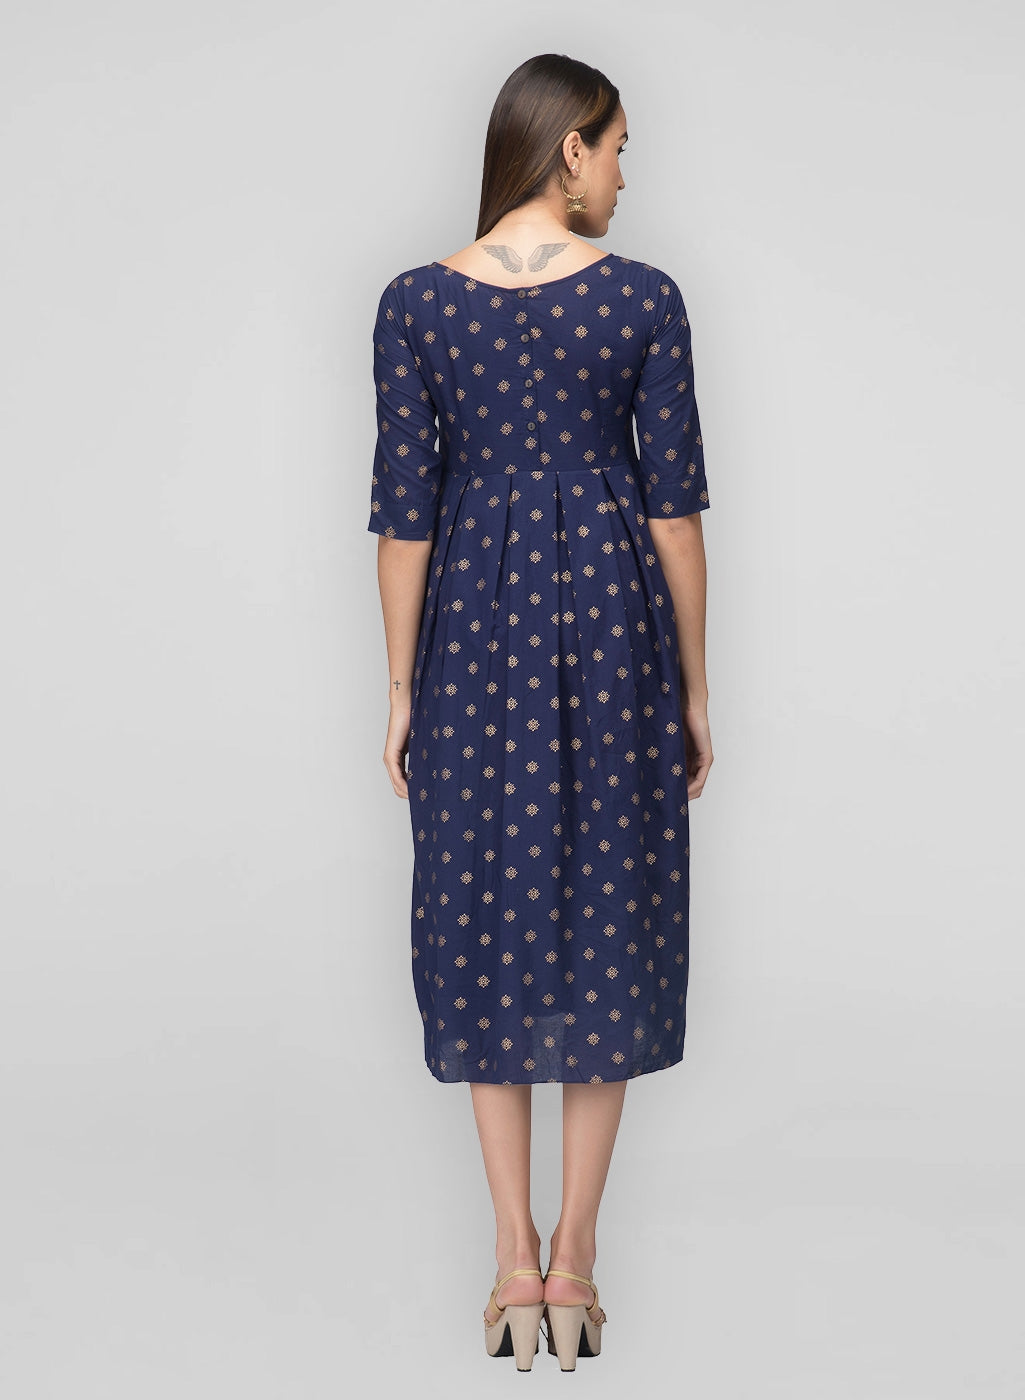 Back button detailing, boat neck, box pleats, and Indian print - east meets west in our navy box pleat dress